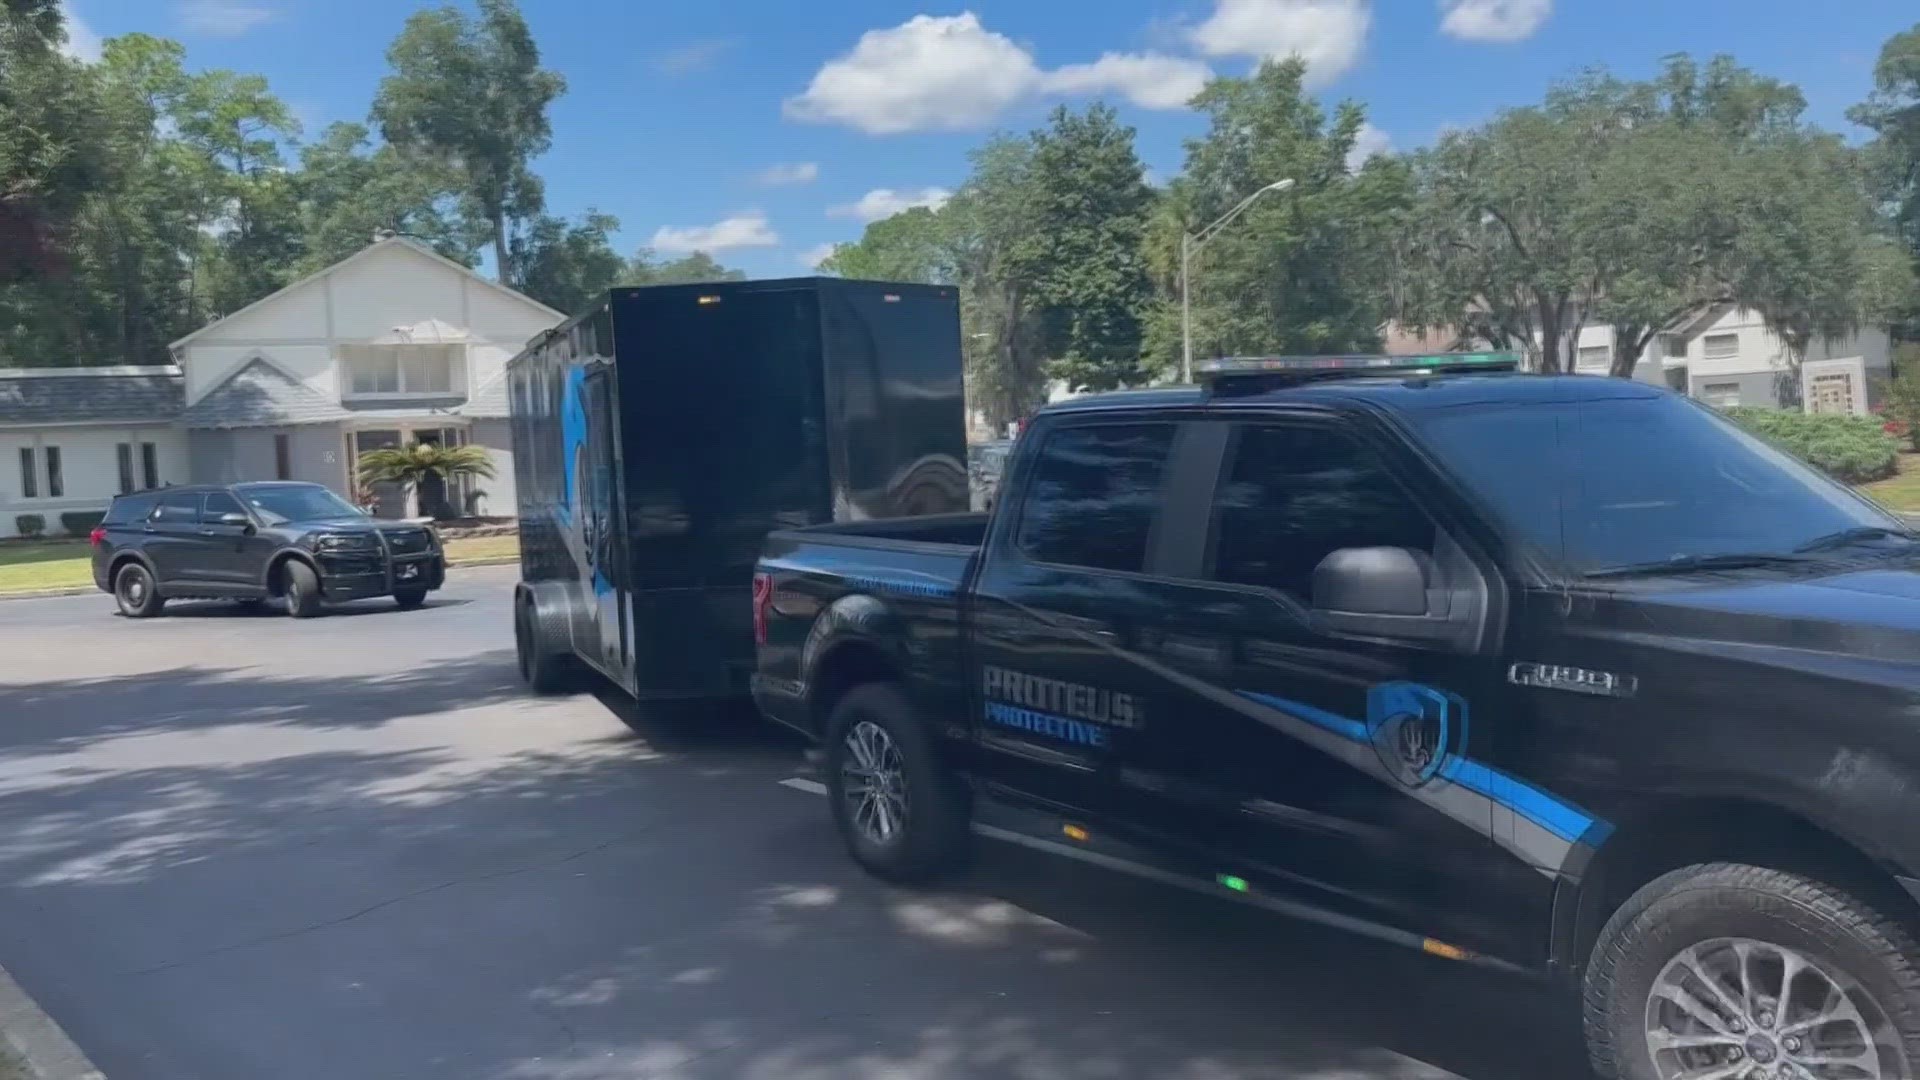 Proteus Protective Services, a local security agency, disaster response, and support team took its mobile command center to support volunteers helping with cleanup.